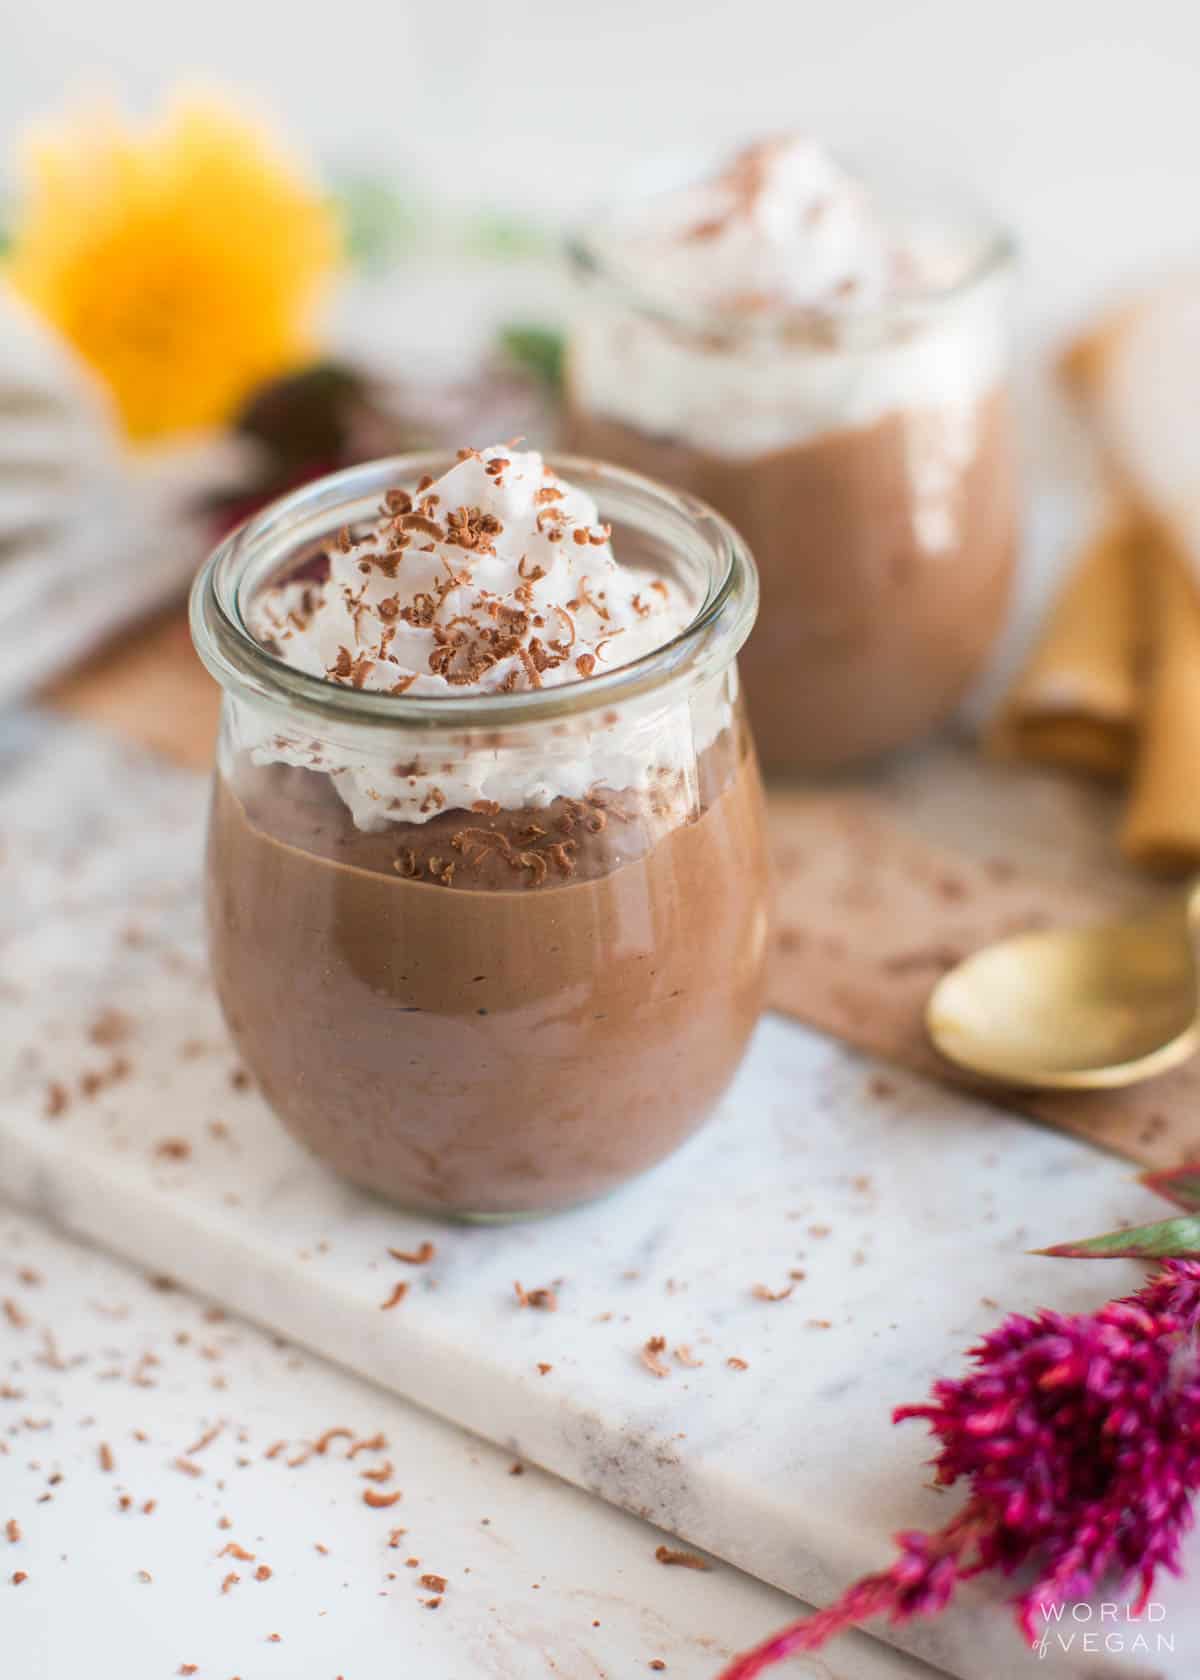 Vegan chocolate pudding in jars, topped with vegan whipped cream and chocolate shavings.